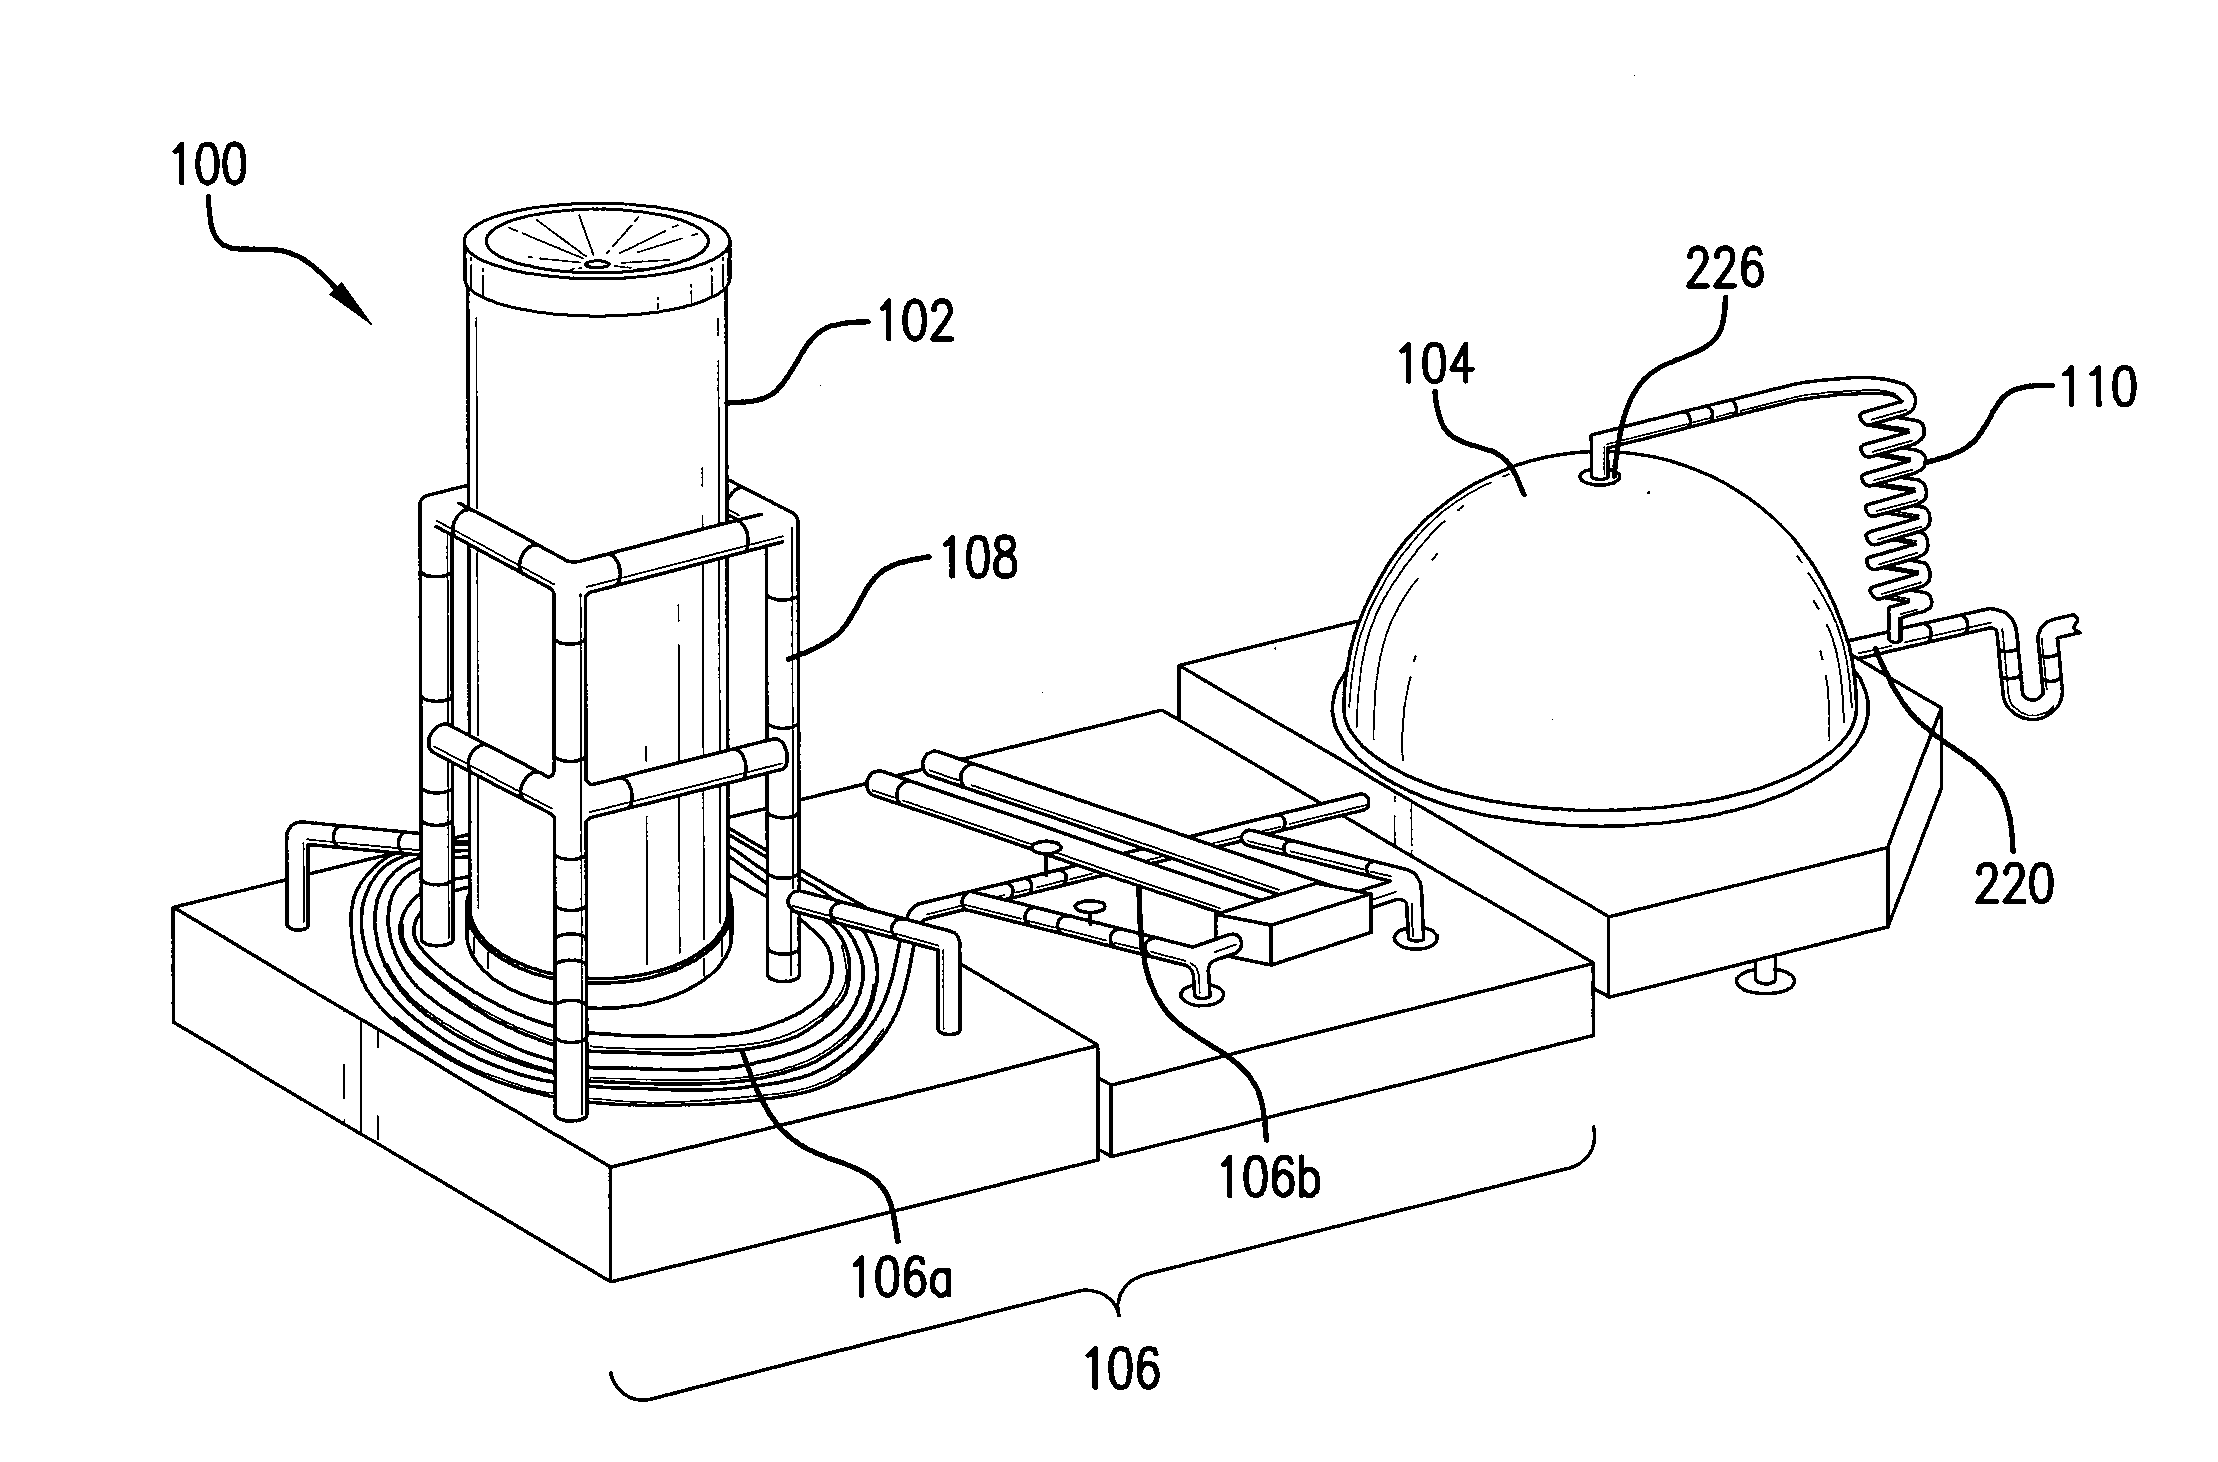 Portable solar apparatus for purifying water